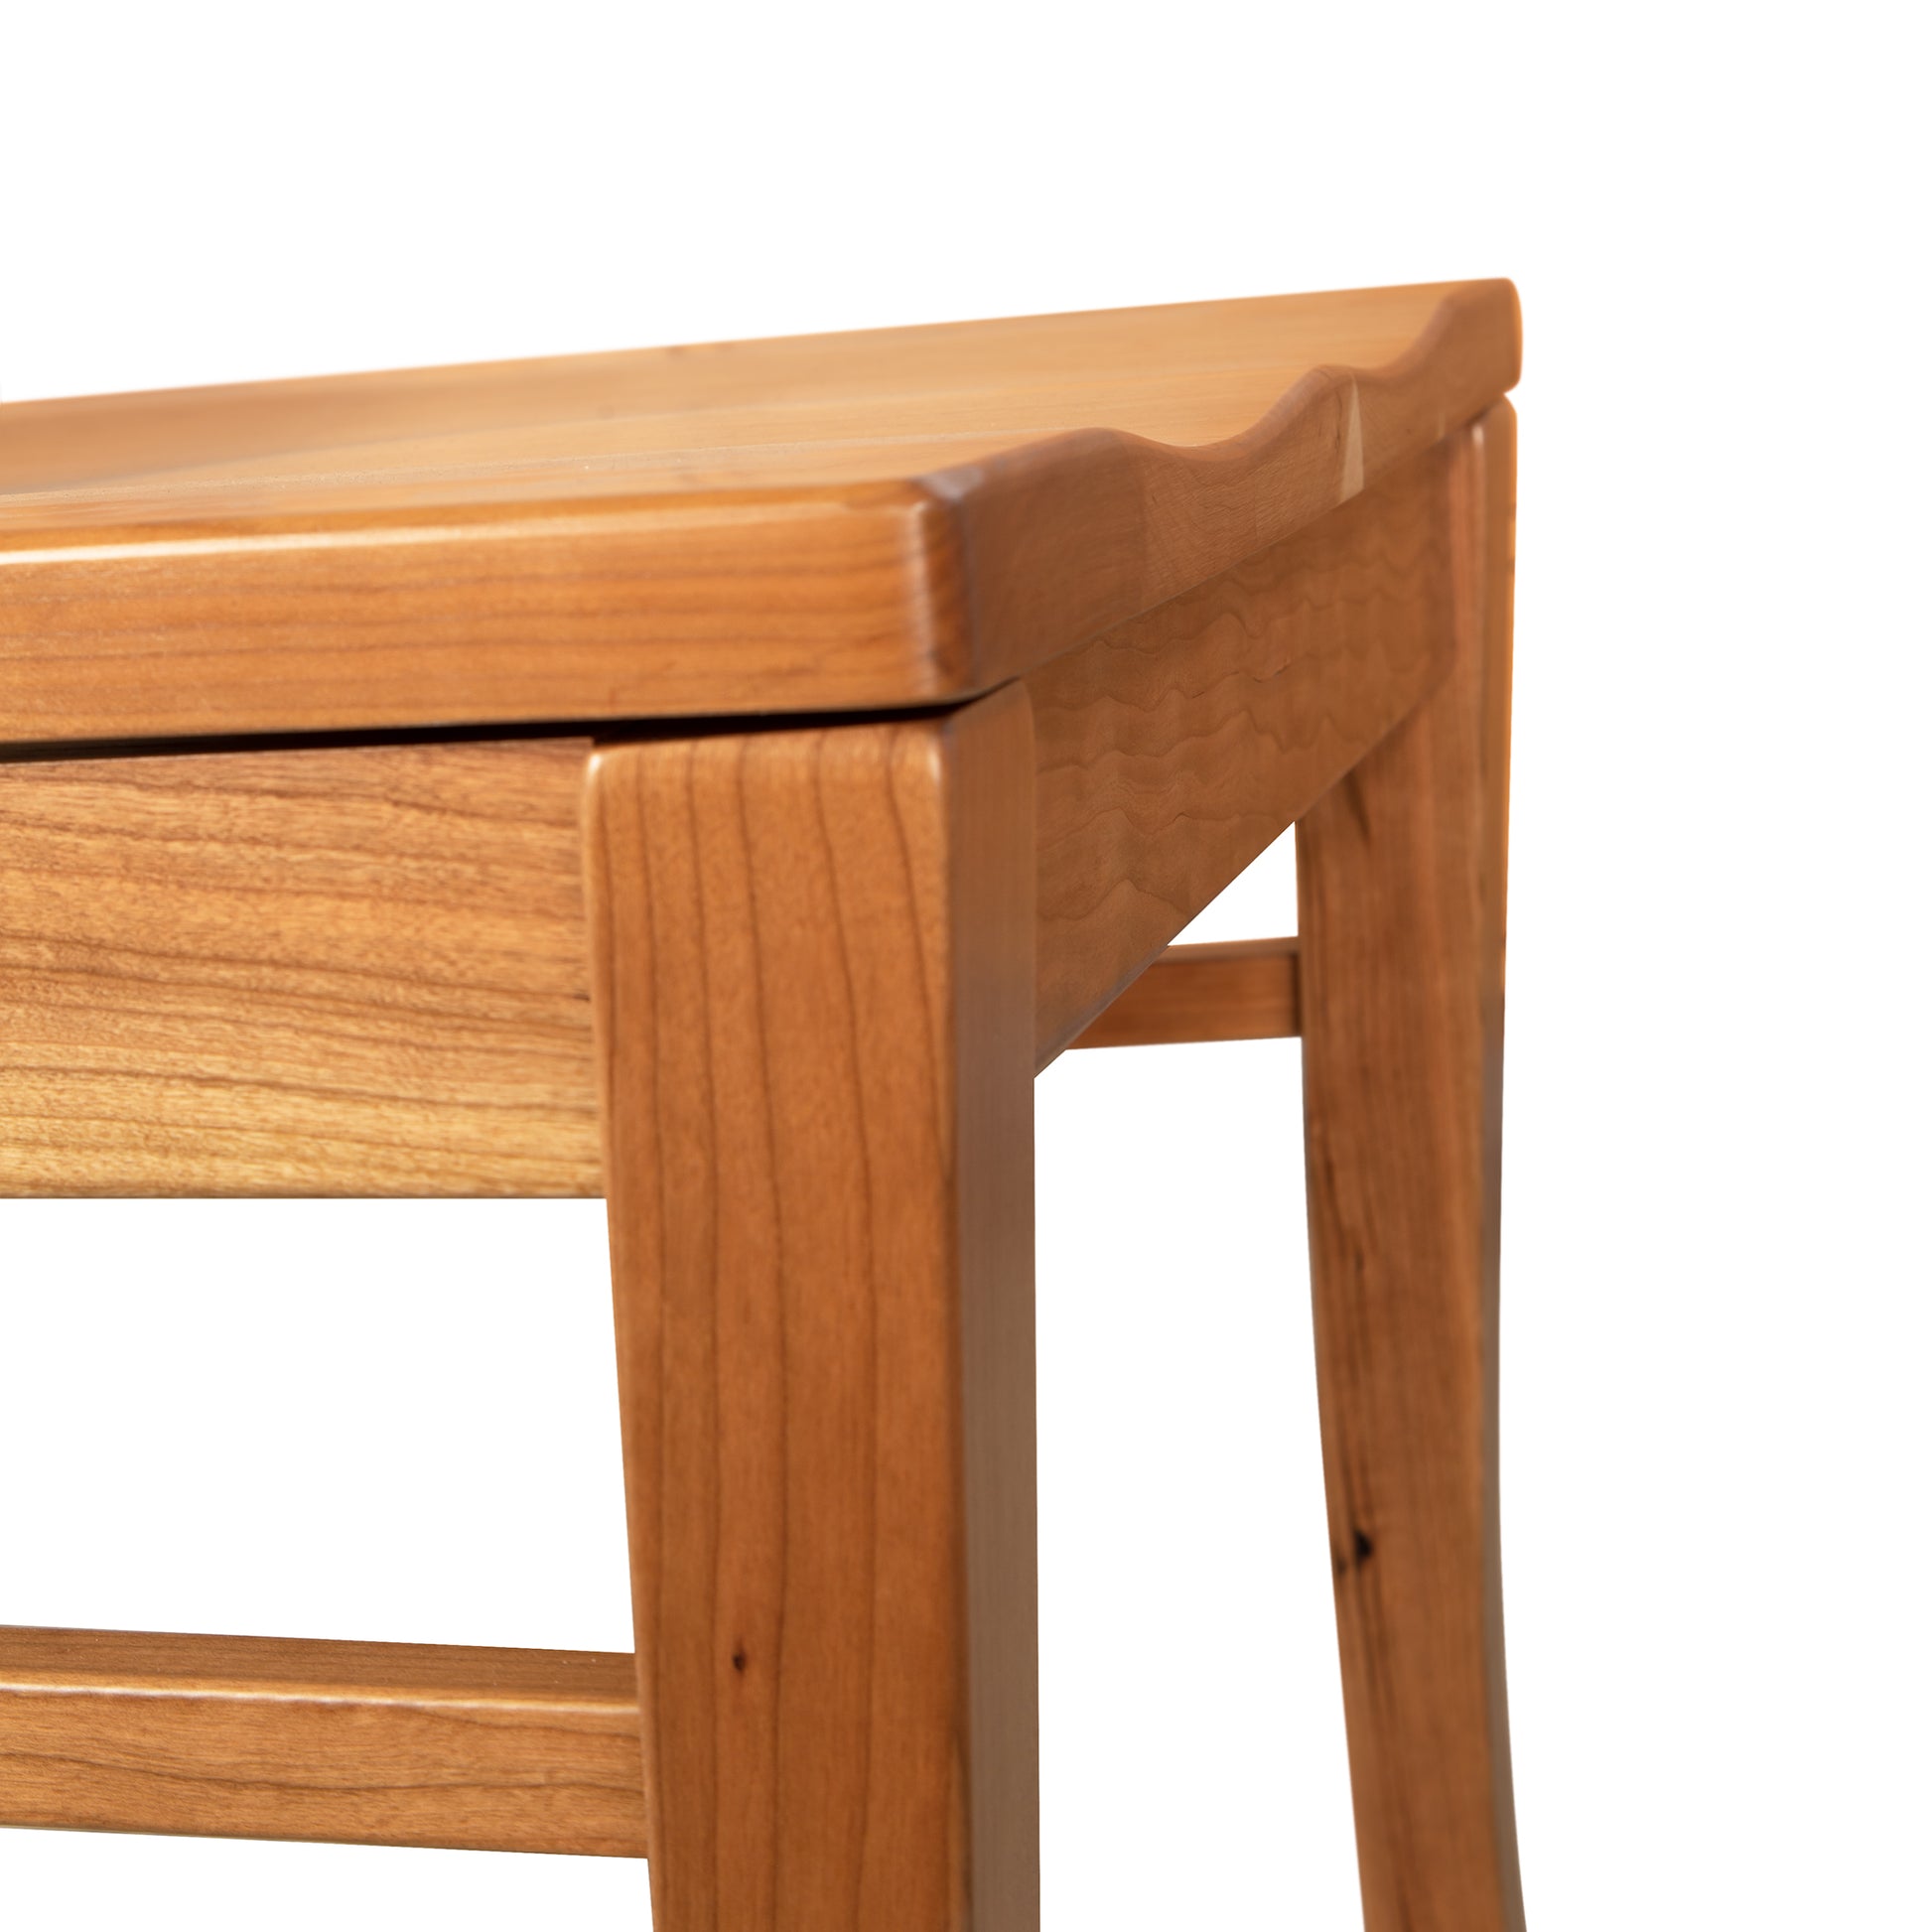 Close-up view of a Vermont Woods Studios Contemporary Shaker Chair with Wood Seat with a smoothly finished surface and detailed handcrafted craftsmanship, isolated on a white background.